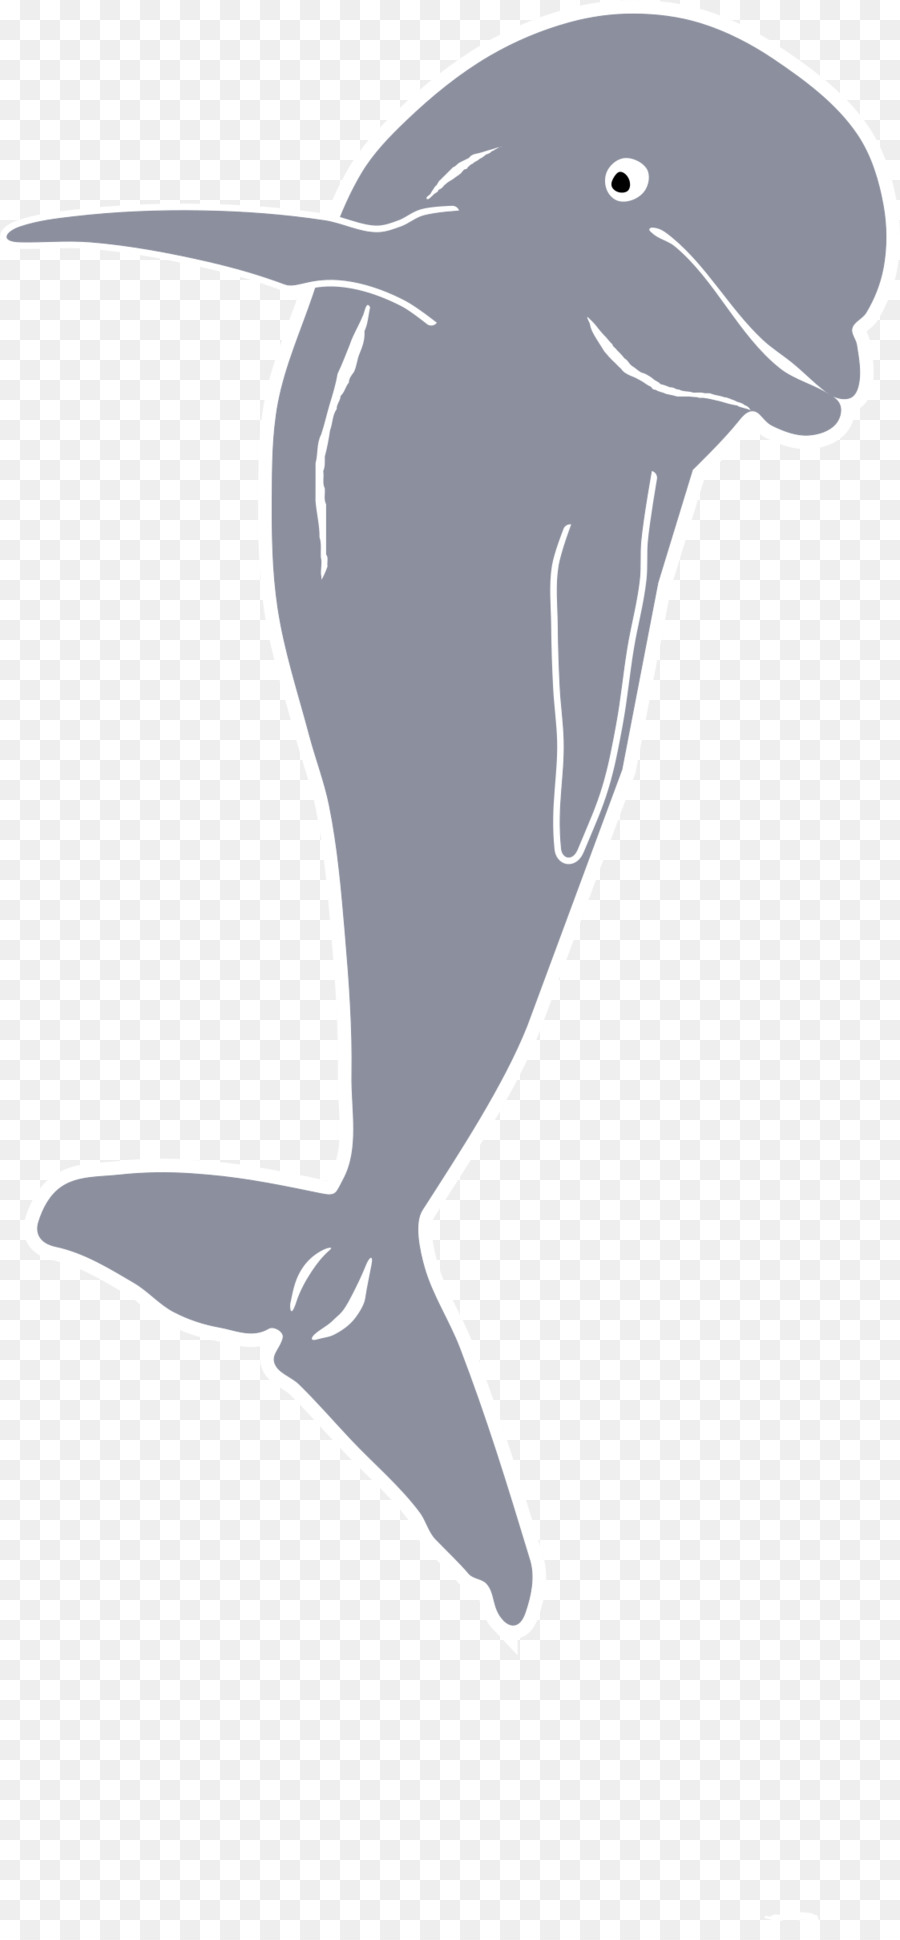 Dolphin Baby Whale Clip art - jumping png download - 1123*2400 - Free Transparent Dolphin png Download.